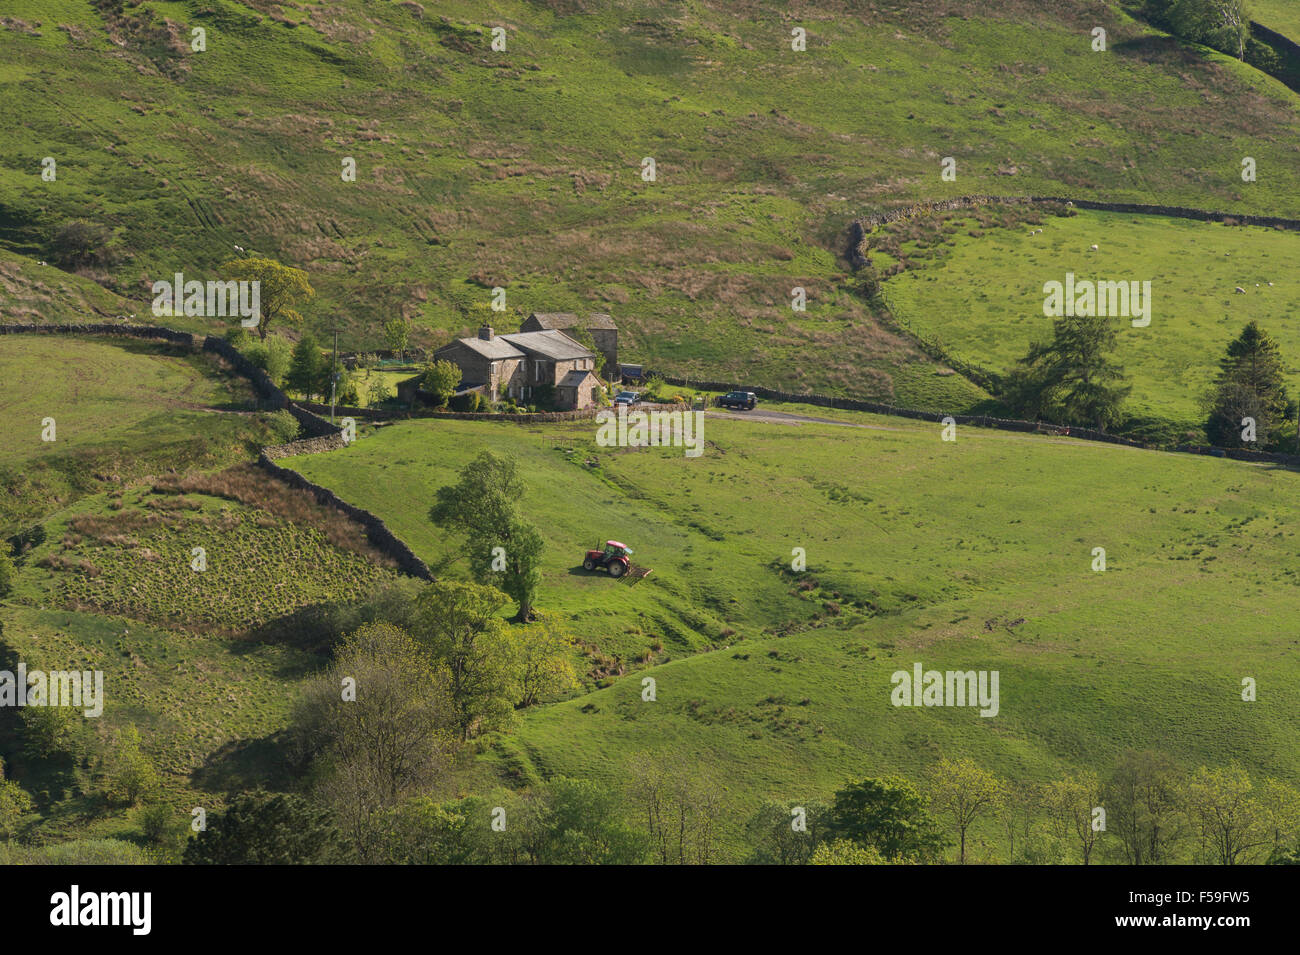 Sunny, high view over the fells in the valley of Dentdale, Cumbria, England, UK - isolated farm & tractor working in a field on steep-sided hillside. Stock Photo